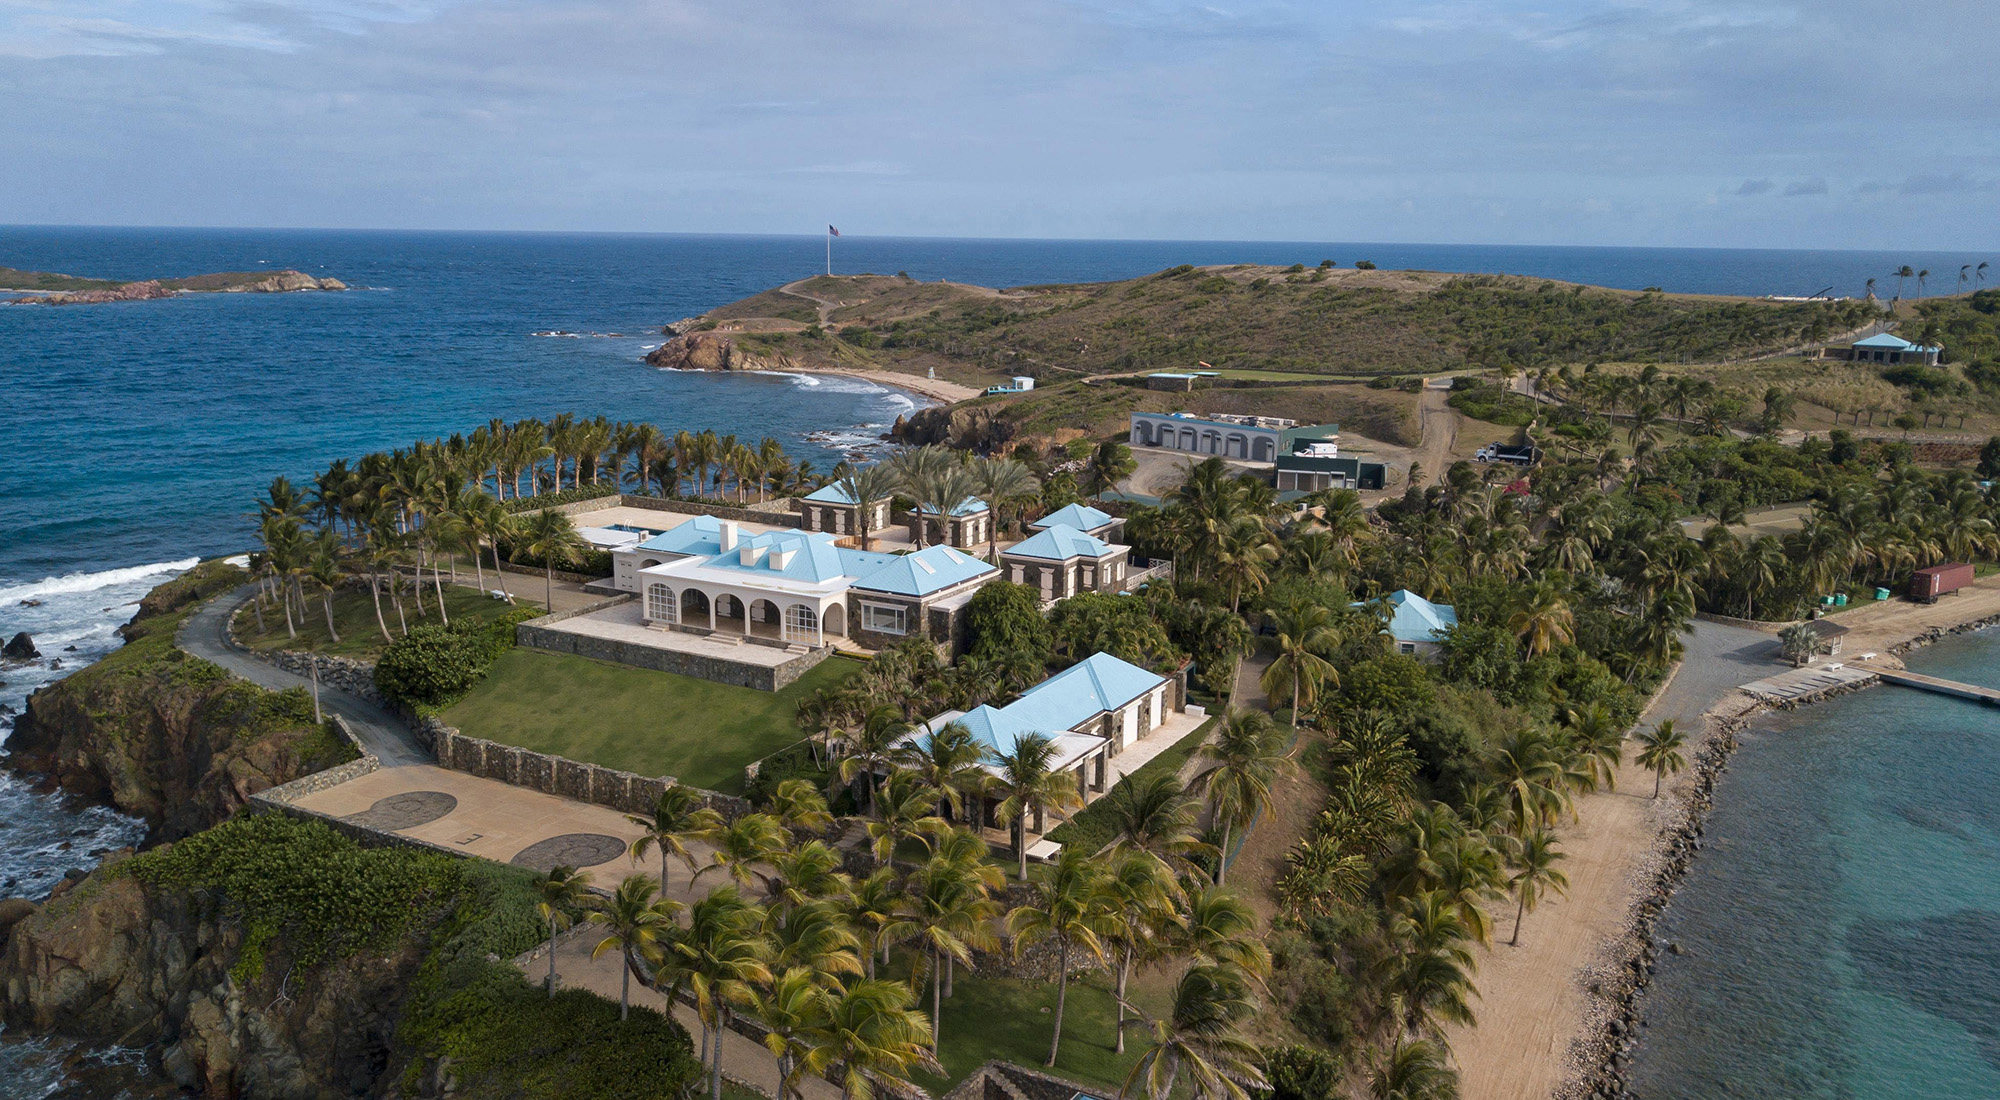 Jeffrey Epstein’s former home on the island of Little St James. Epstein’s estate agreed to pay the Virgin Islands government US$105 million in cash and half of the proceeds from the sale of Little St James. Photo: TNS